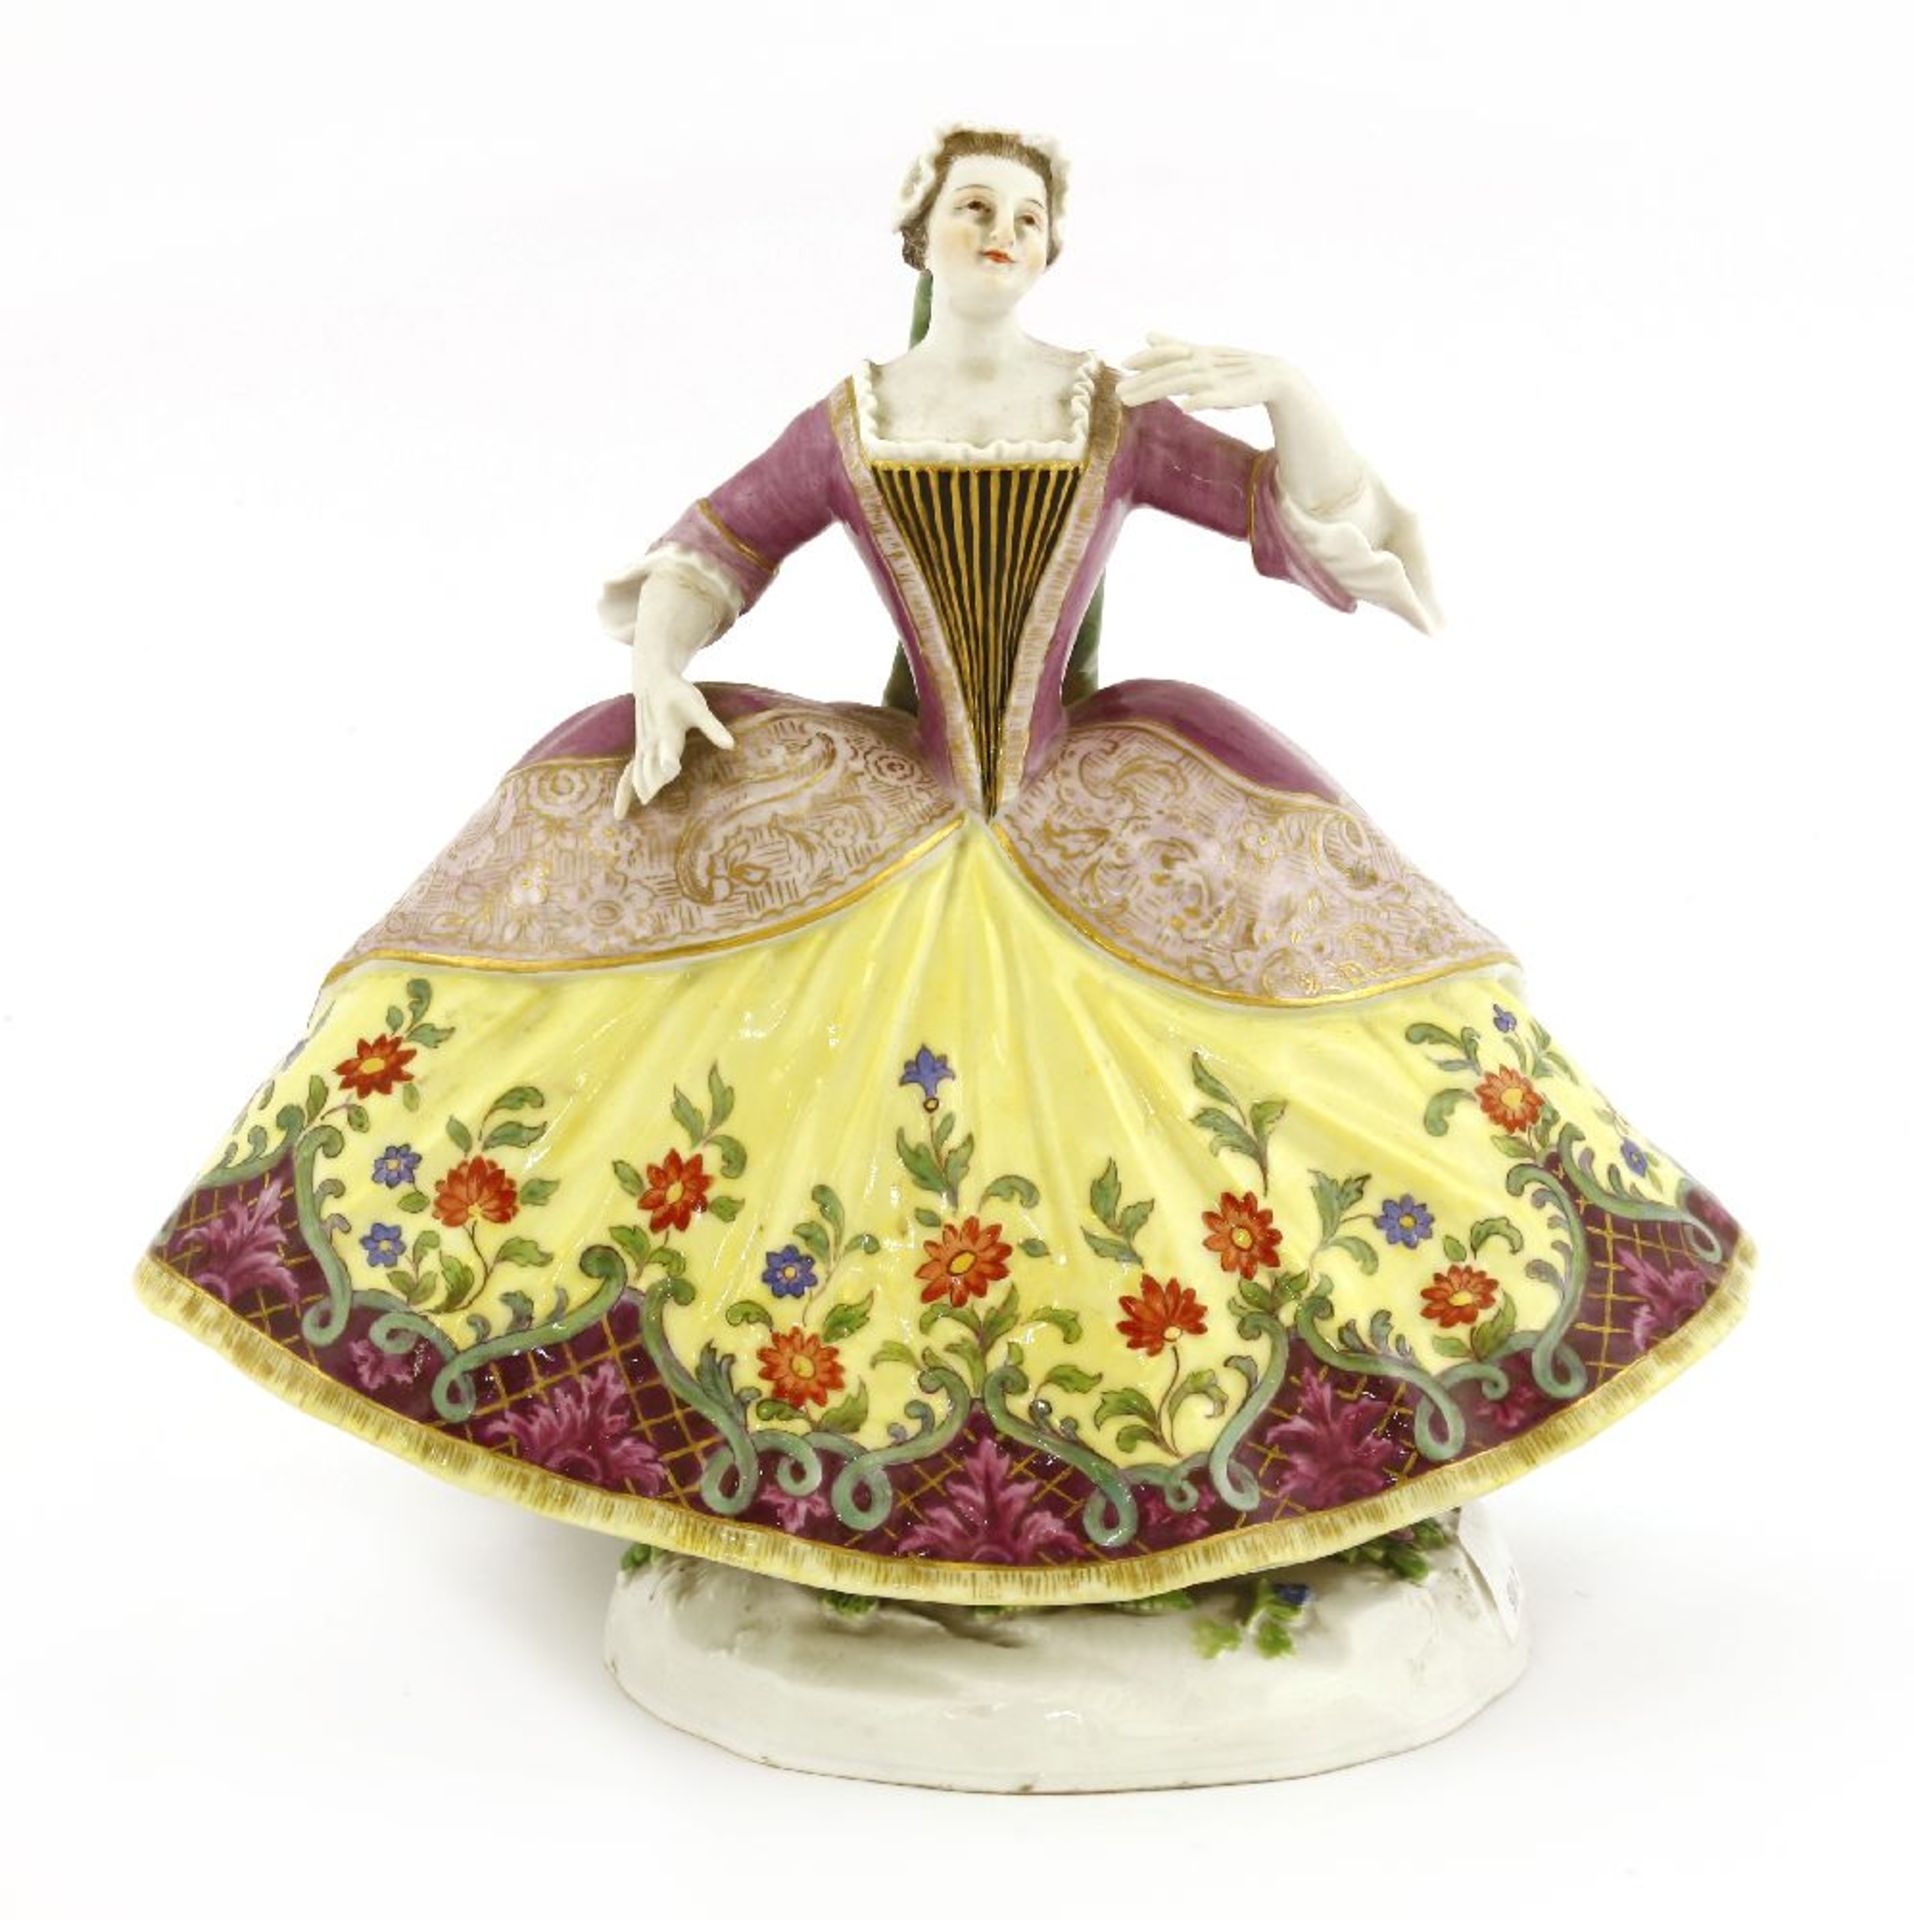 A Meissen porcelain figure of Kitty Clive, wearing a large billowing dress, purple with scrolling